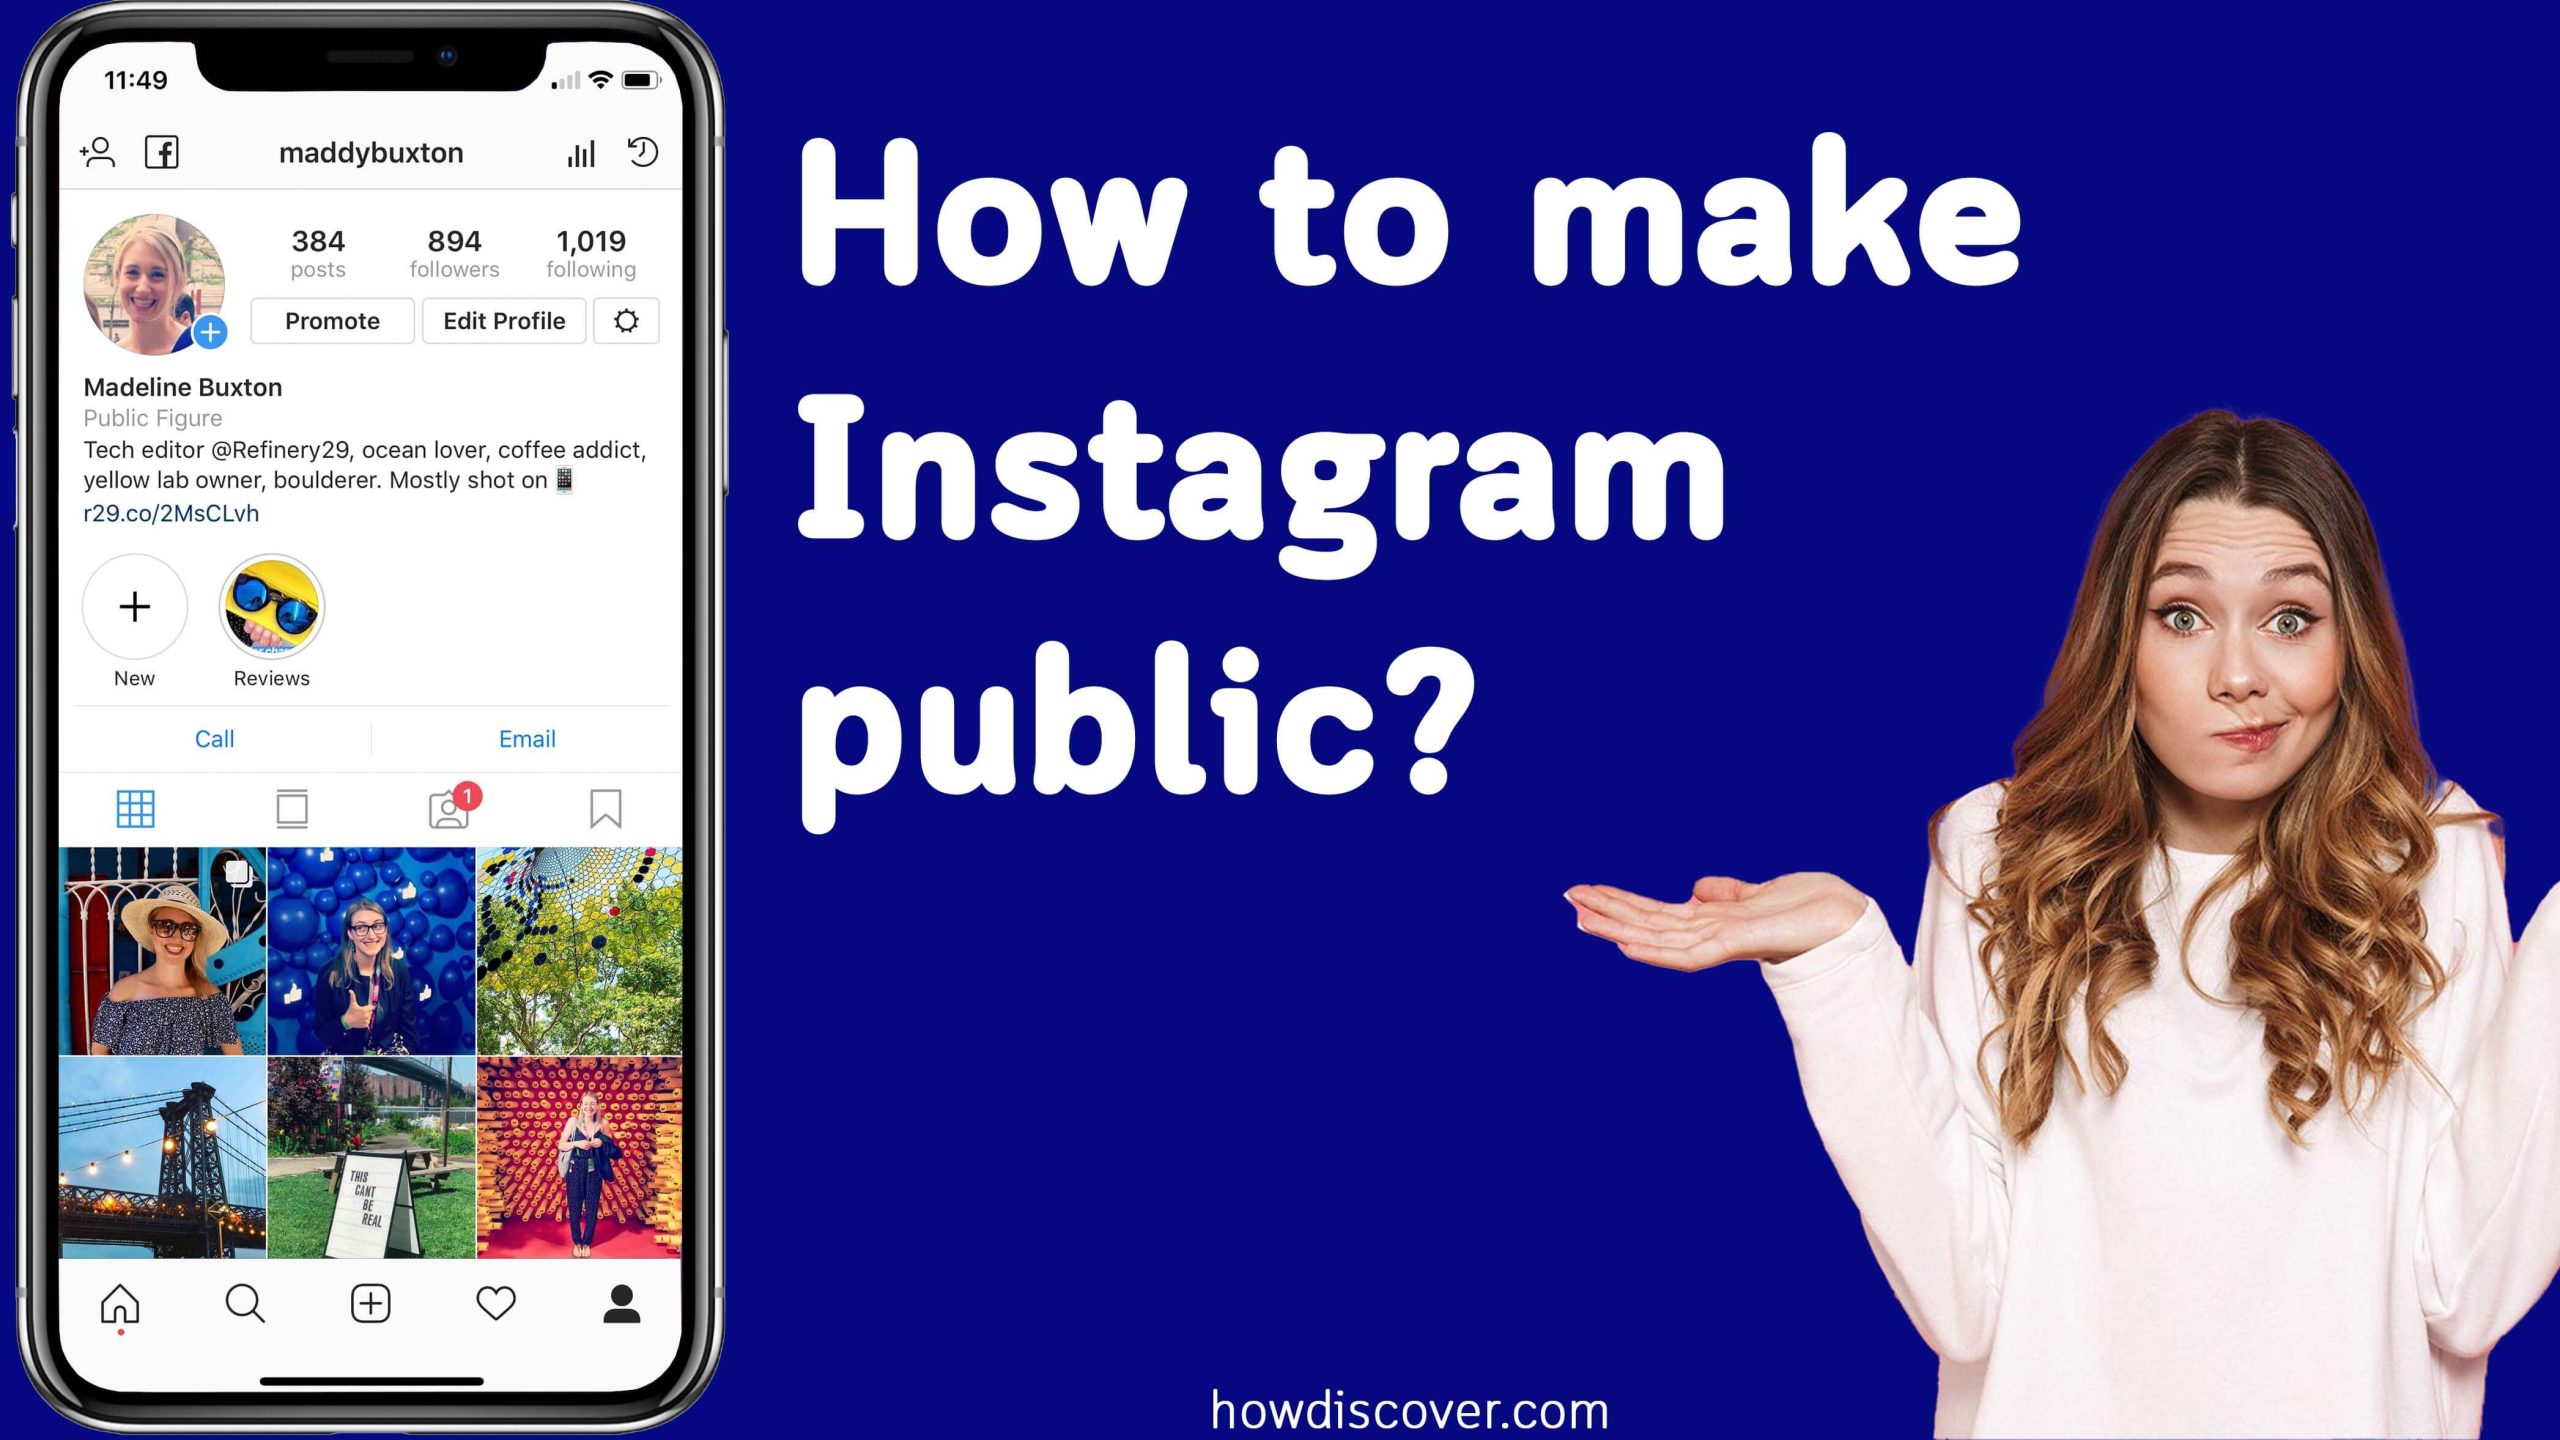 How to make Instagram public?